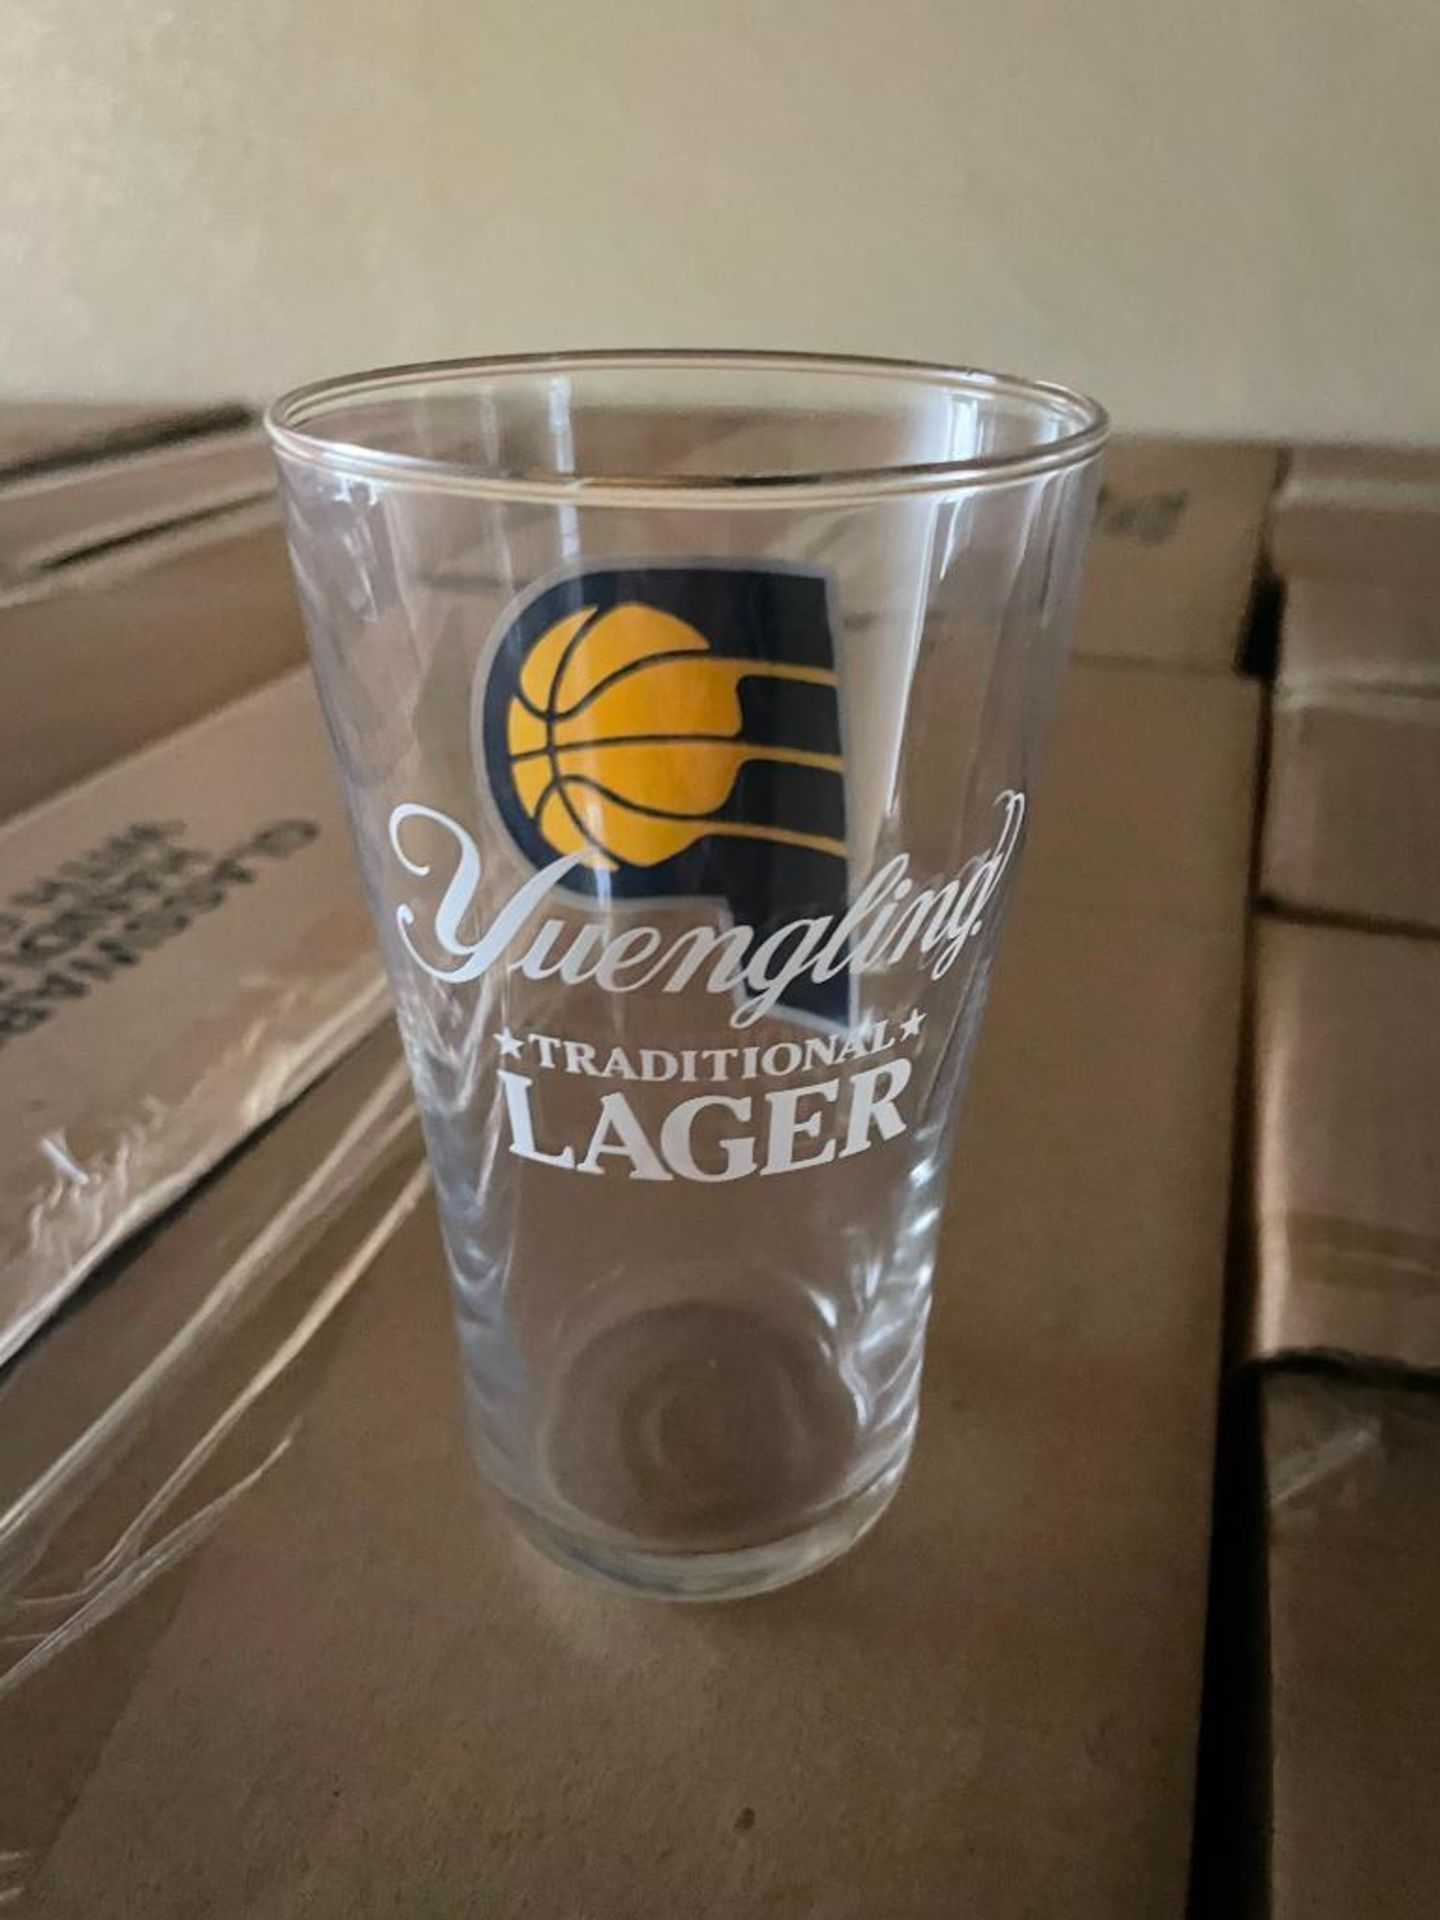 (1,008) YUENGLING TRADITIONAL LAGER 16OZ GLASSES - Image 2 of 2